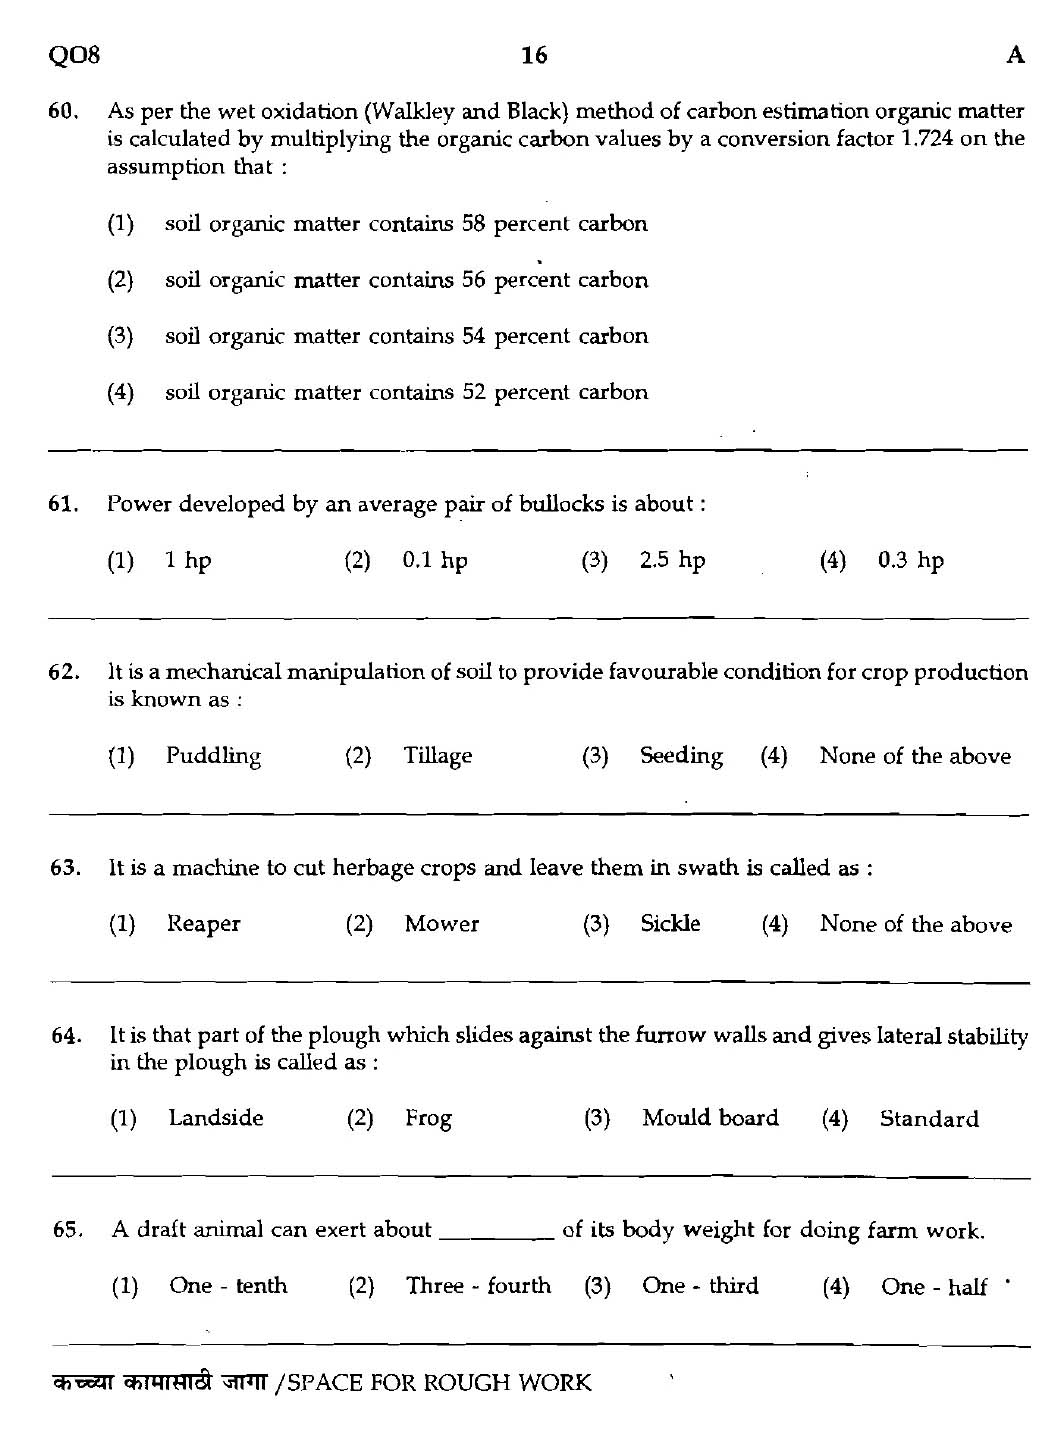 MPSC Agricultural Services Main Exam 2016 Question Paper 1 Agricultural Science 15